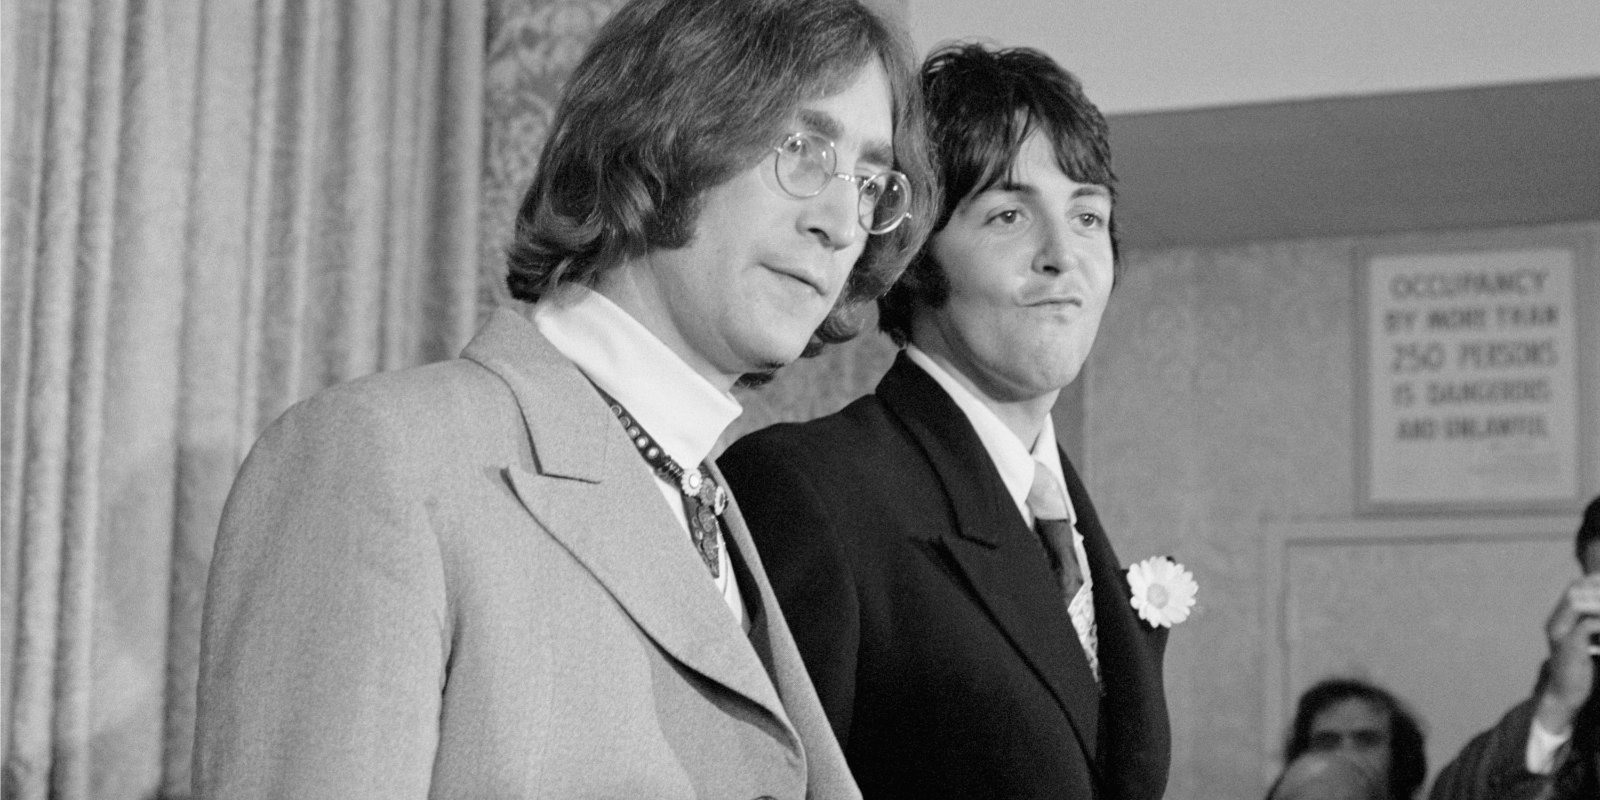 John Lennon and Paul McCartney pose together announcing Apple Corps at a press conference.